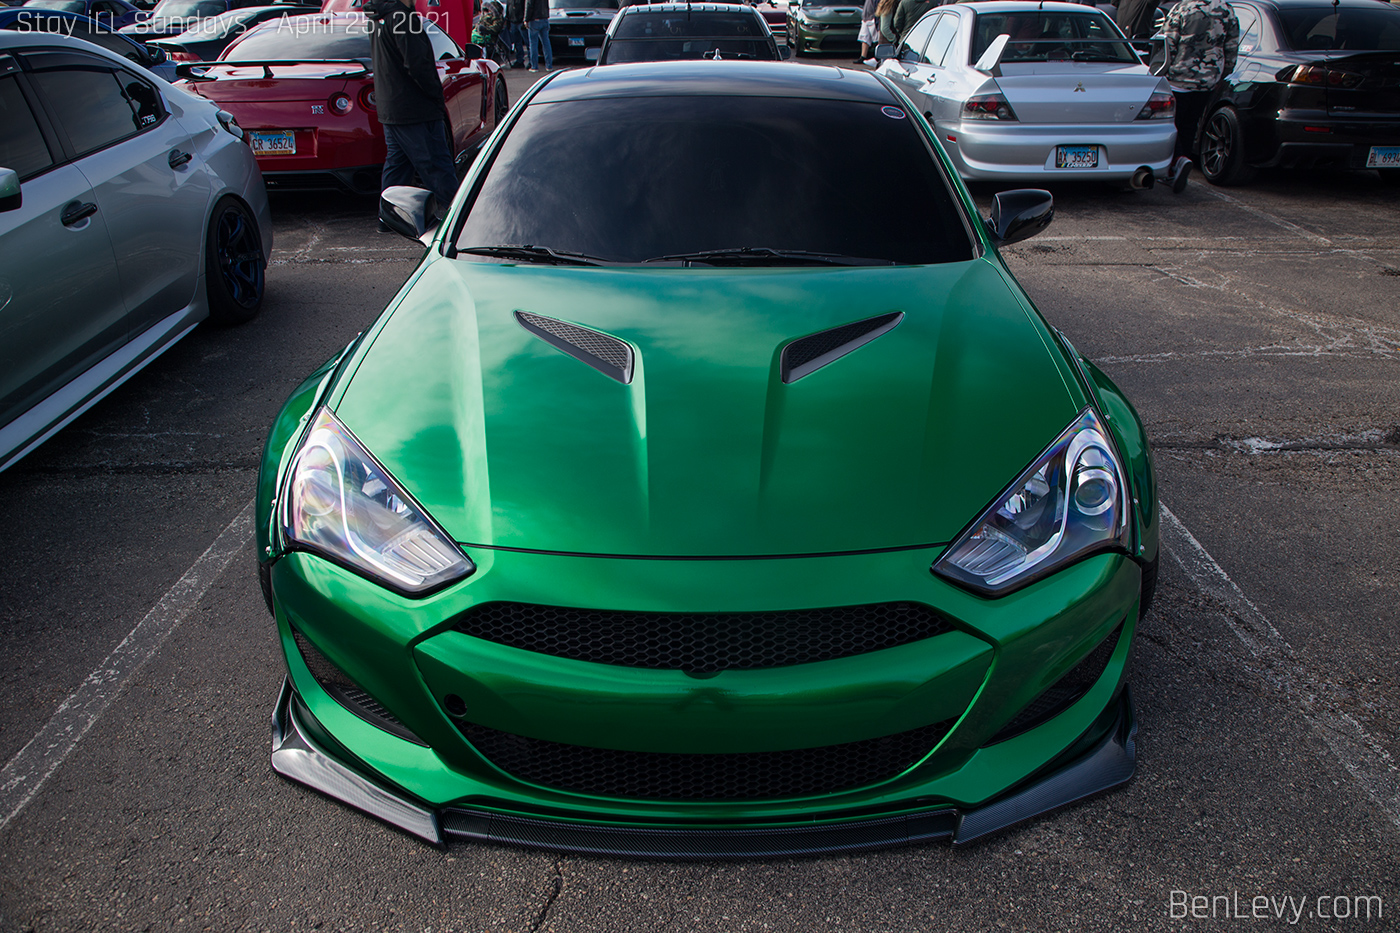 Front of Wide-body Hyundai Genesis Coupe